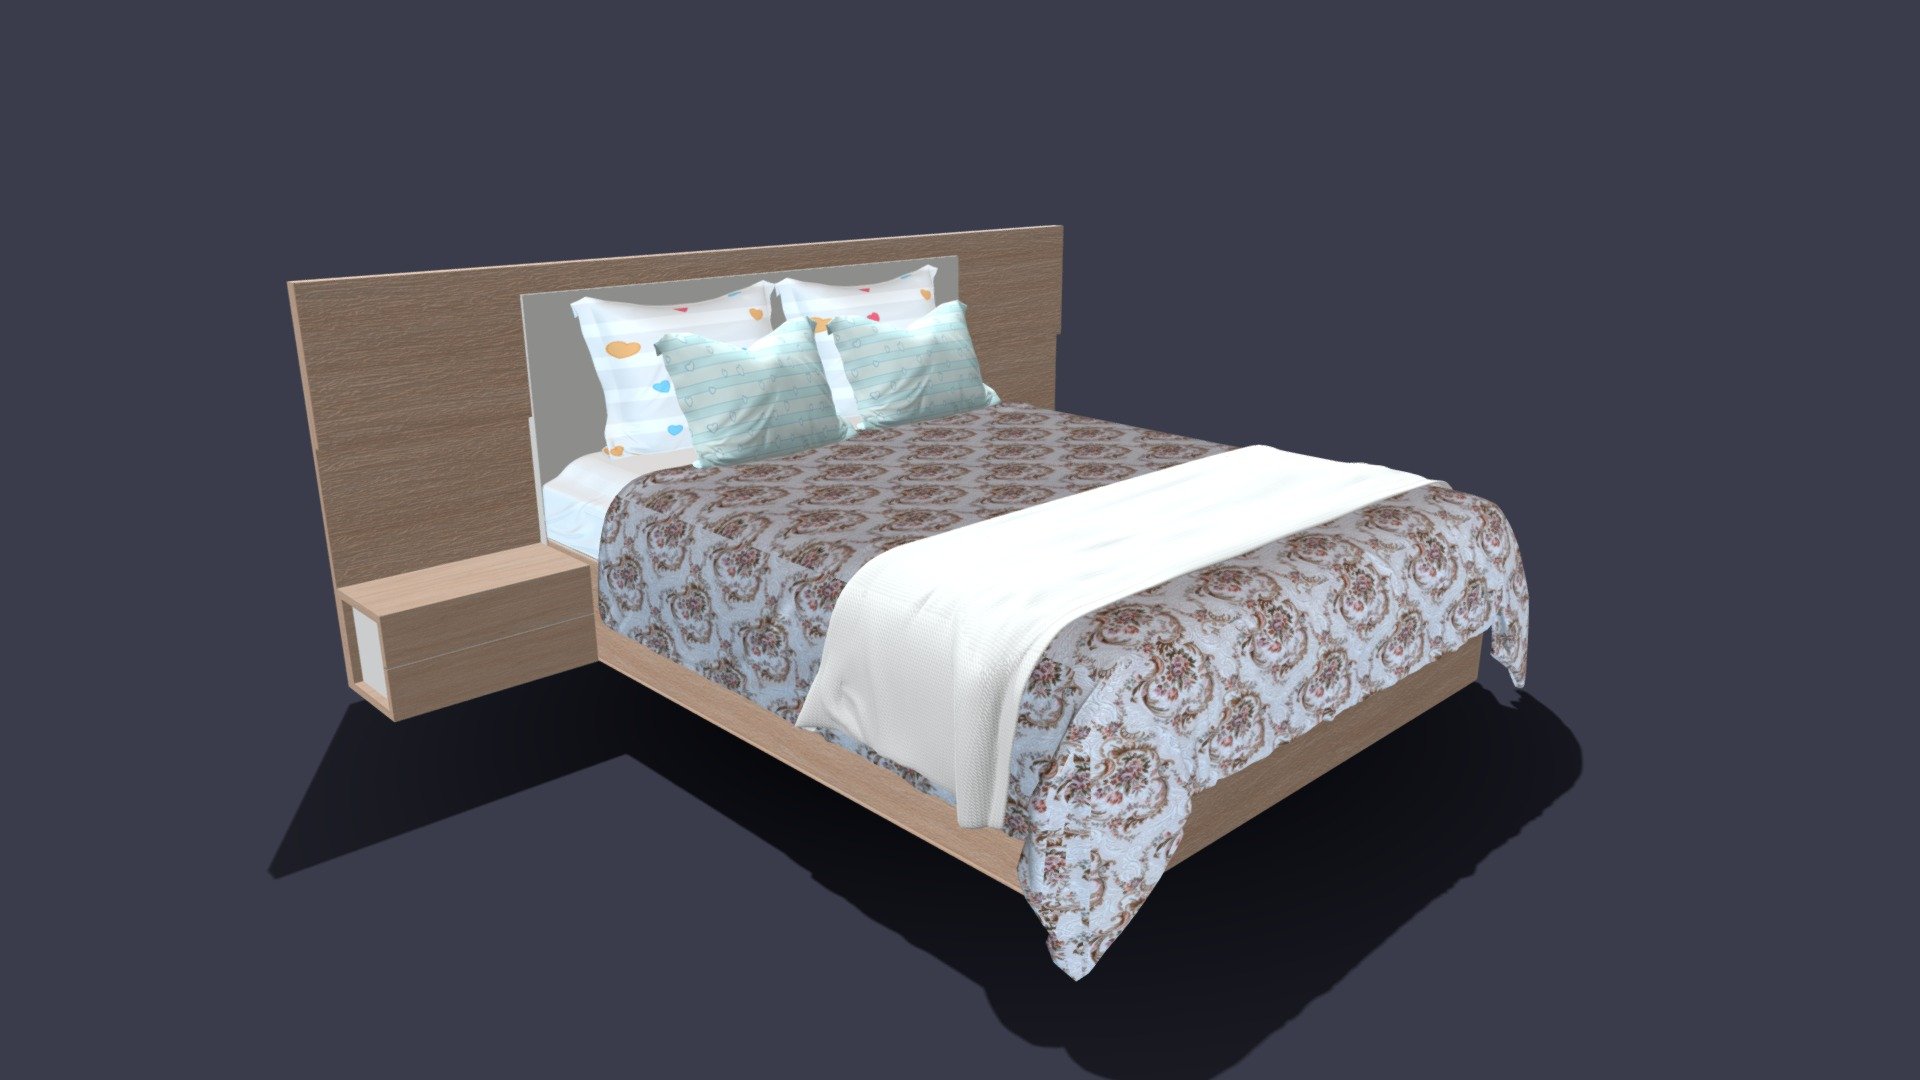 BED 19 WITH PBR MATERIALS
AVAILABLE FILE FORMATS 





3DS MAX      (.MAX)   VERSION- 2014




MAYA    (.MA , .MB)      VERSION- 2014




CINEMA 4D    (.C4D)     VERSION- R19      




BLENDER          (.BLEND)    VERSION- 2.9




SKETCHUP   (.SKP)    VERSION- 2017




FBX              (.FBX)                         




OBJ              (.OBJ) 




COLLADA          (.DAE)   




3DS              (.3DS)      

YOU CAN ALSO IMPORT IN MAJOR 3D SOFTWARES WHICH SUPPORT FBX,OBJ,3DS,DAE FORMATS                                          



**NOTES **     


- CREATED WITH 3DS MAX SOFTWARES WITHOUT ANY PLUGINS


- NO ADDITIONAL PLUGINS UDED IN ANY SOFTWARE


- PBR TEXTURES USED


- 20+ PBR BONUS TEXTURES INCLUDED WITH THIS FILE THEREFORE YOU CAN CHANGE THE TEXTURES


- SOME CHANGES MAY BE NEEDED IN MATERIALS VALUE ASPER YOUR RENDER PLUGIN
 - BED 19 - Buy Royalty Free 3D model by jasirkt 3d model